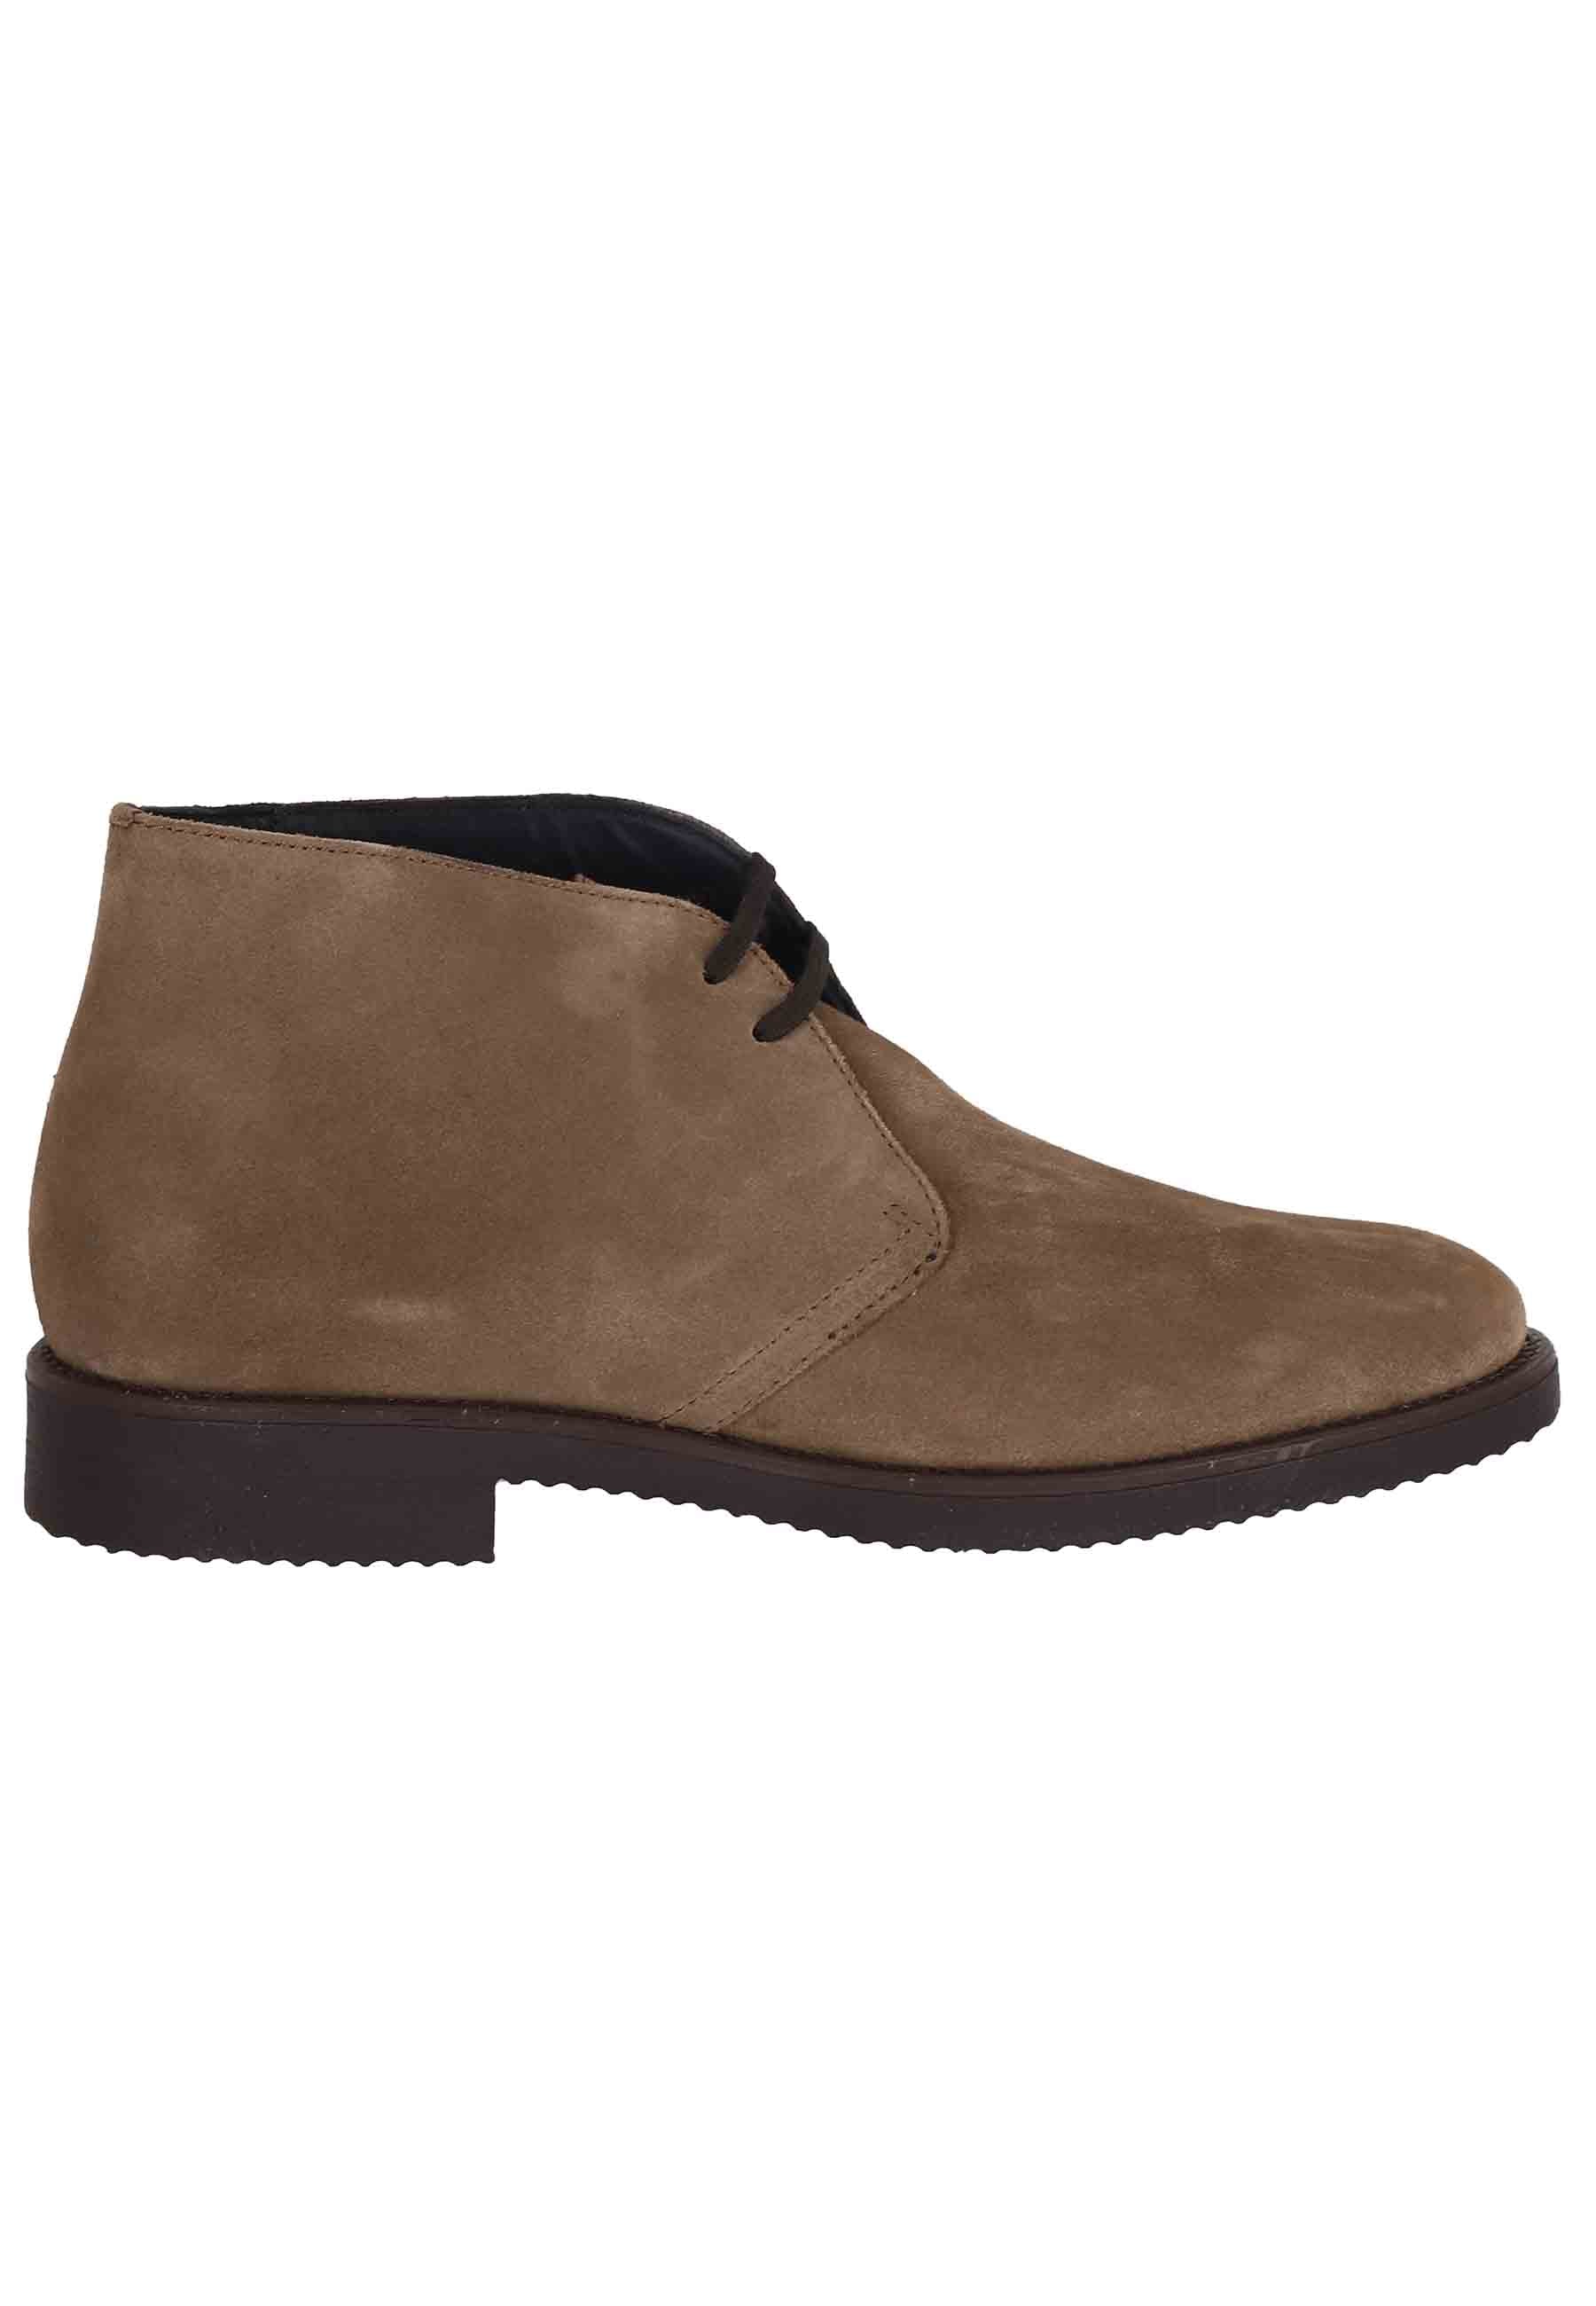 Men's ankle boots in taupe suede with crepe sole